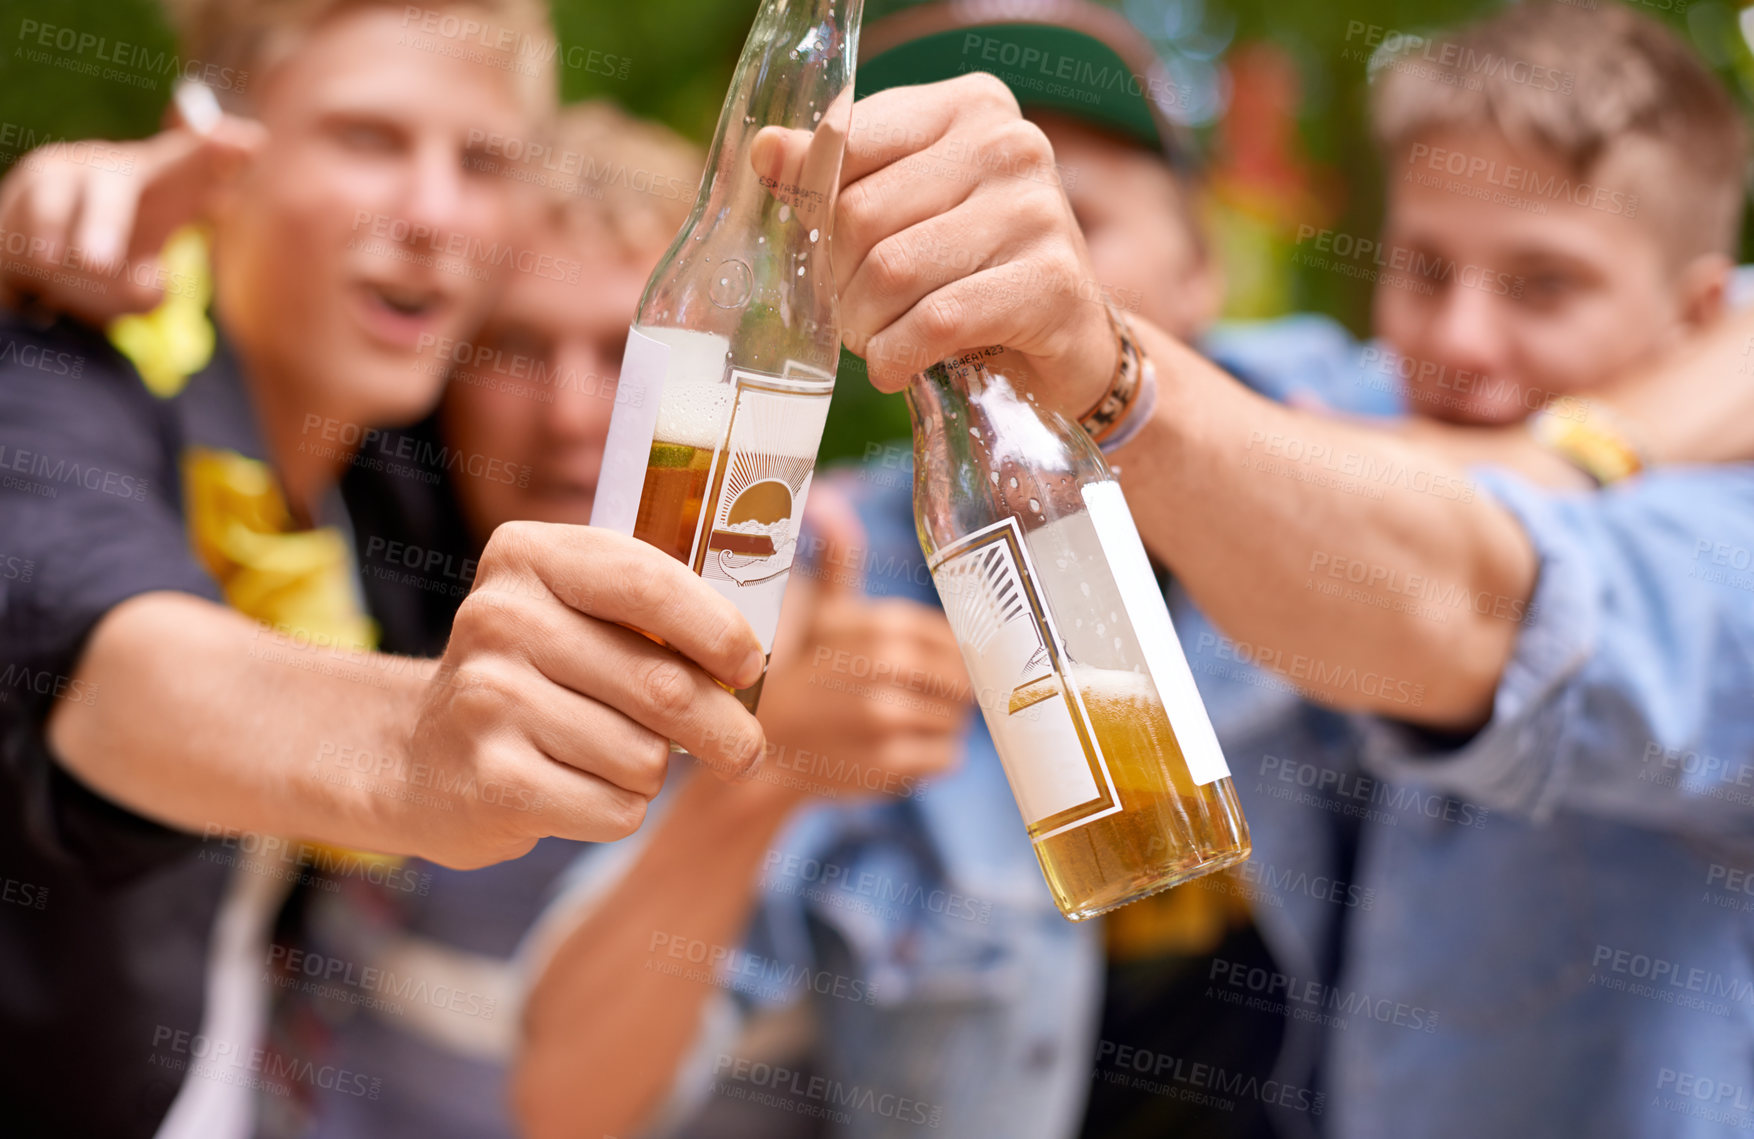 Buy stock photo Cropped shot a group of young men toasting with beer bottles